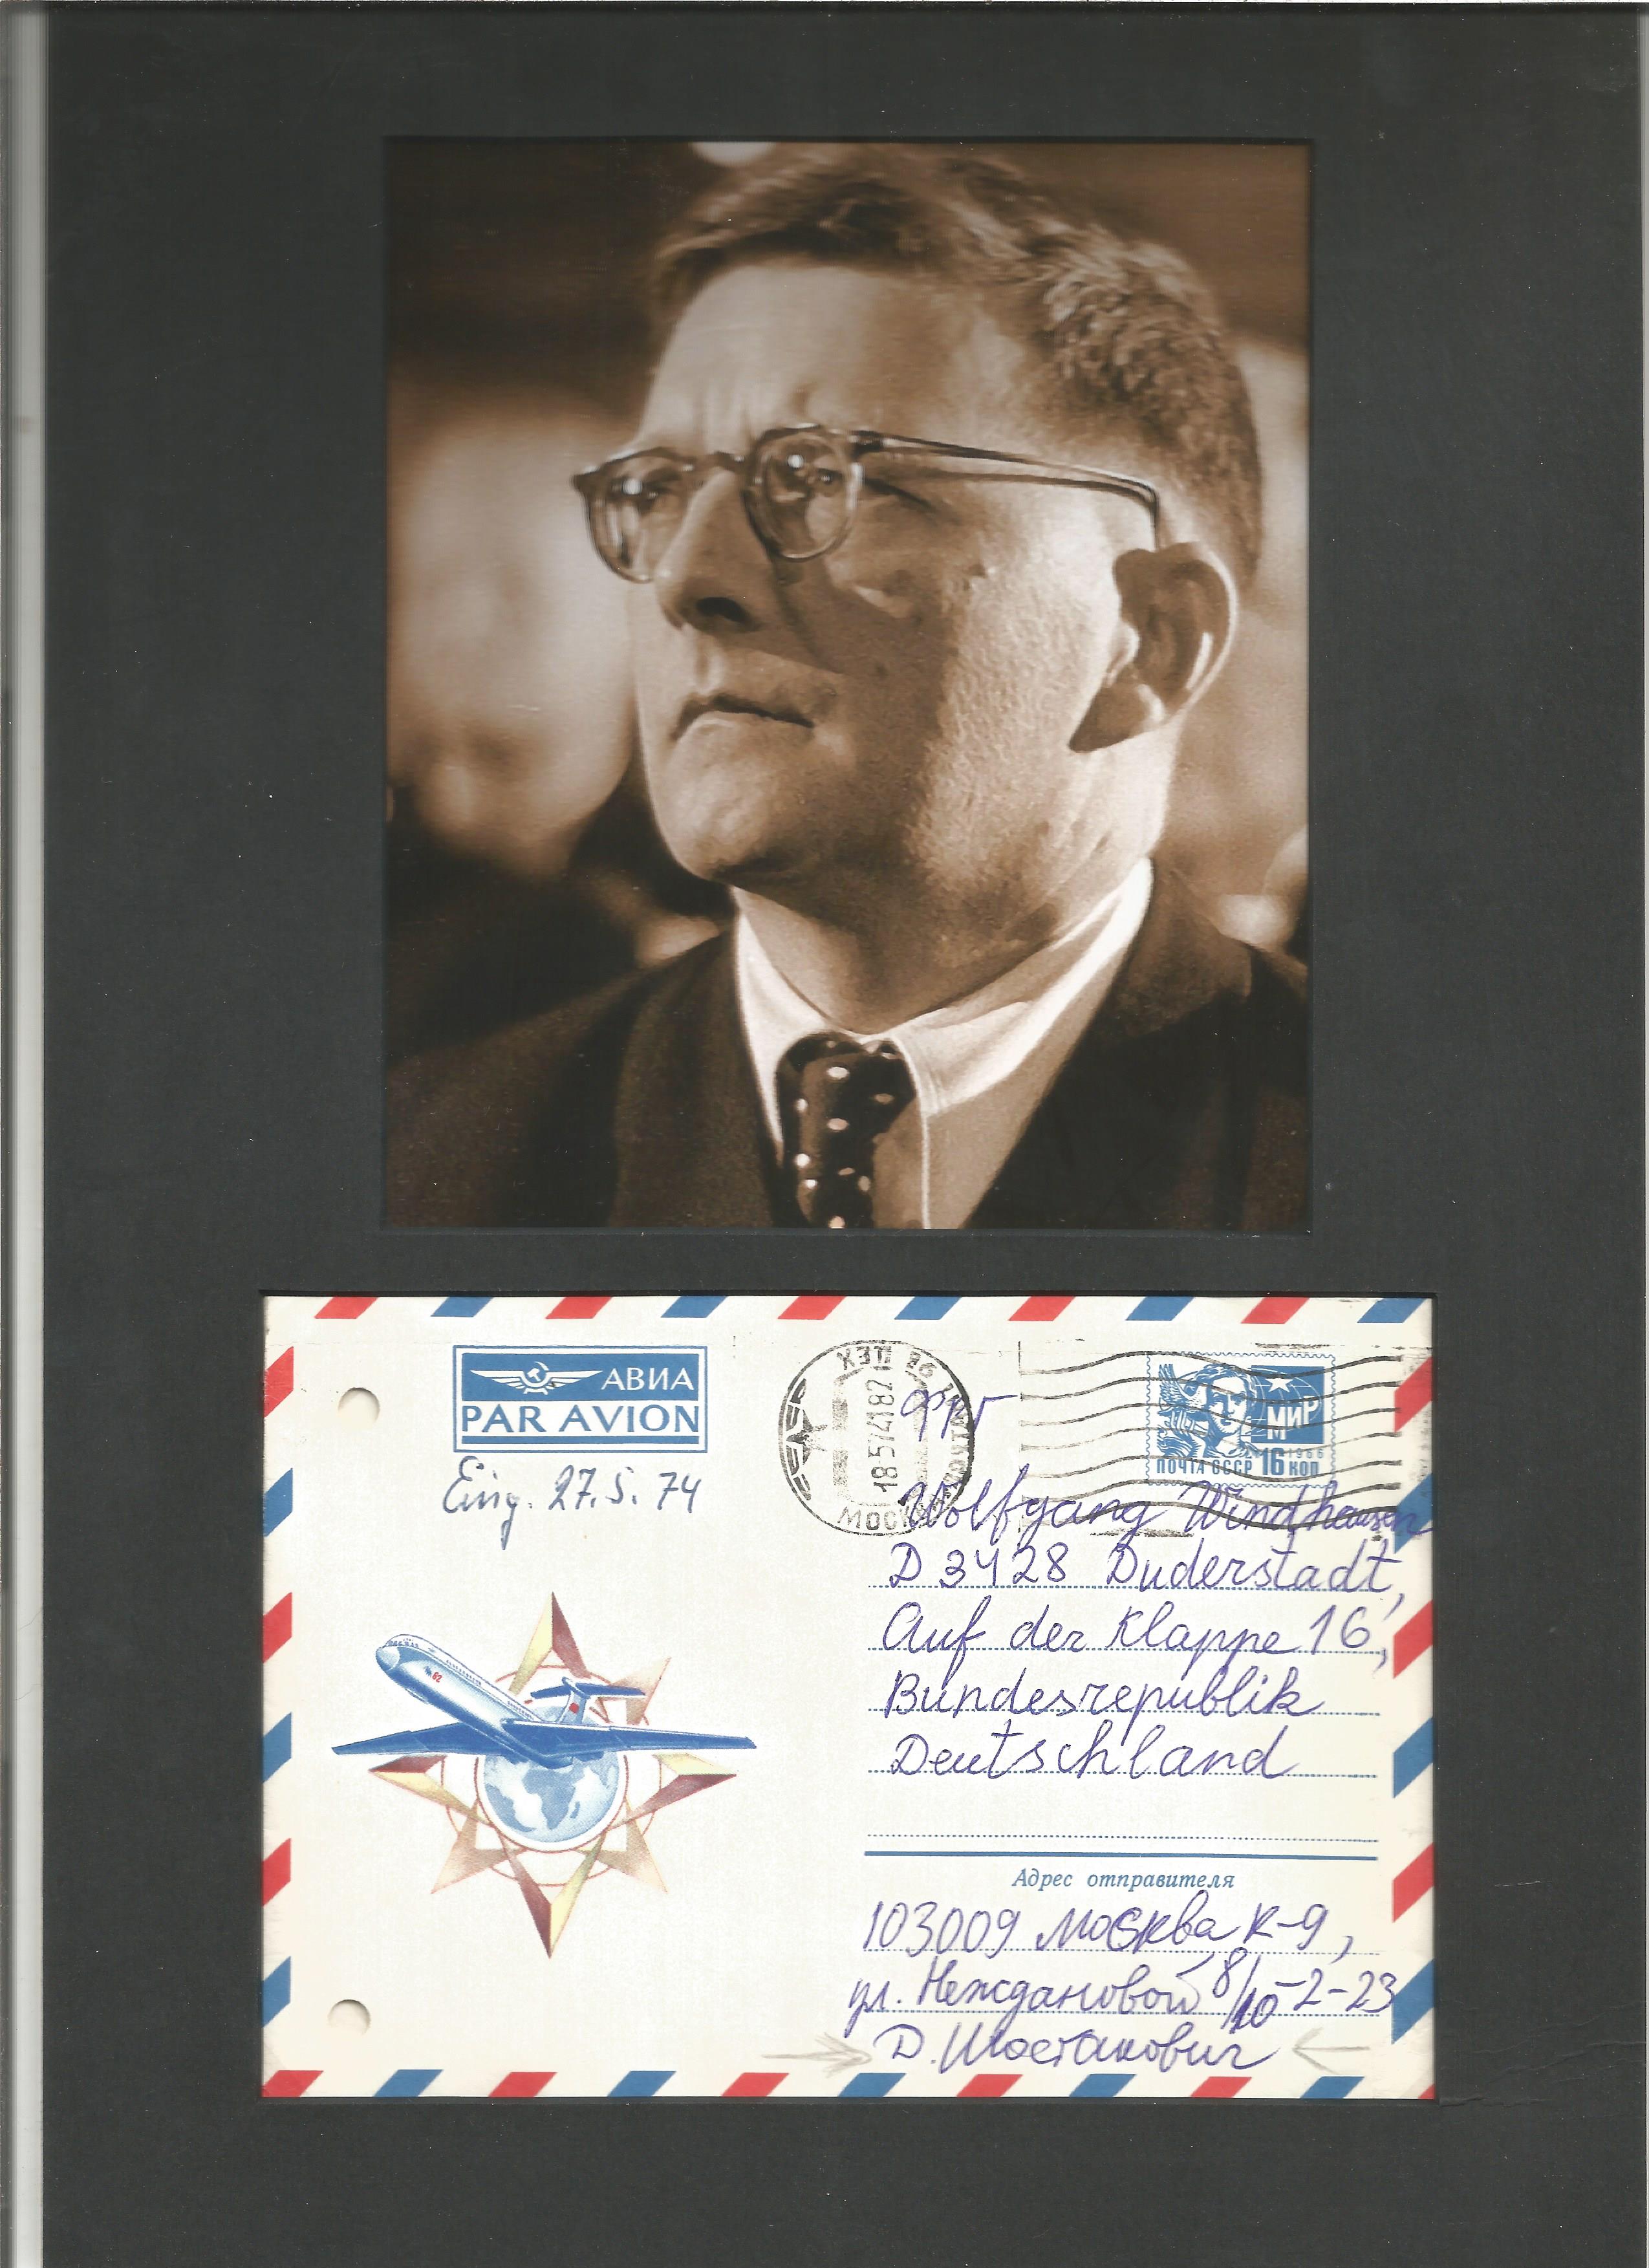 Dmitri Shostakovich hand written Airmail envelope mounted with b/w phot to approx 10 x 8 inch